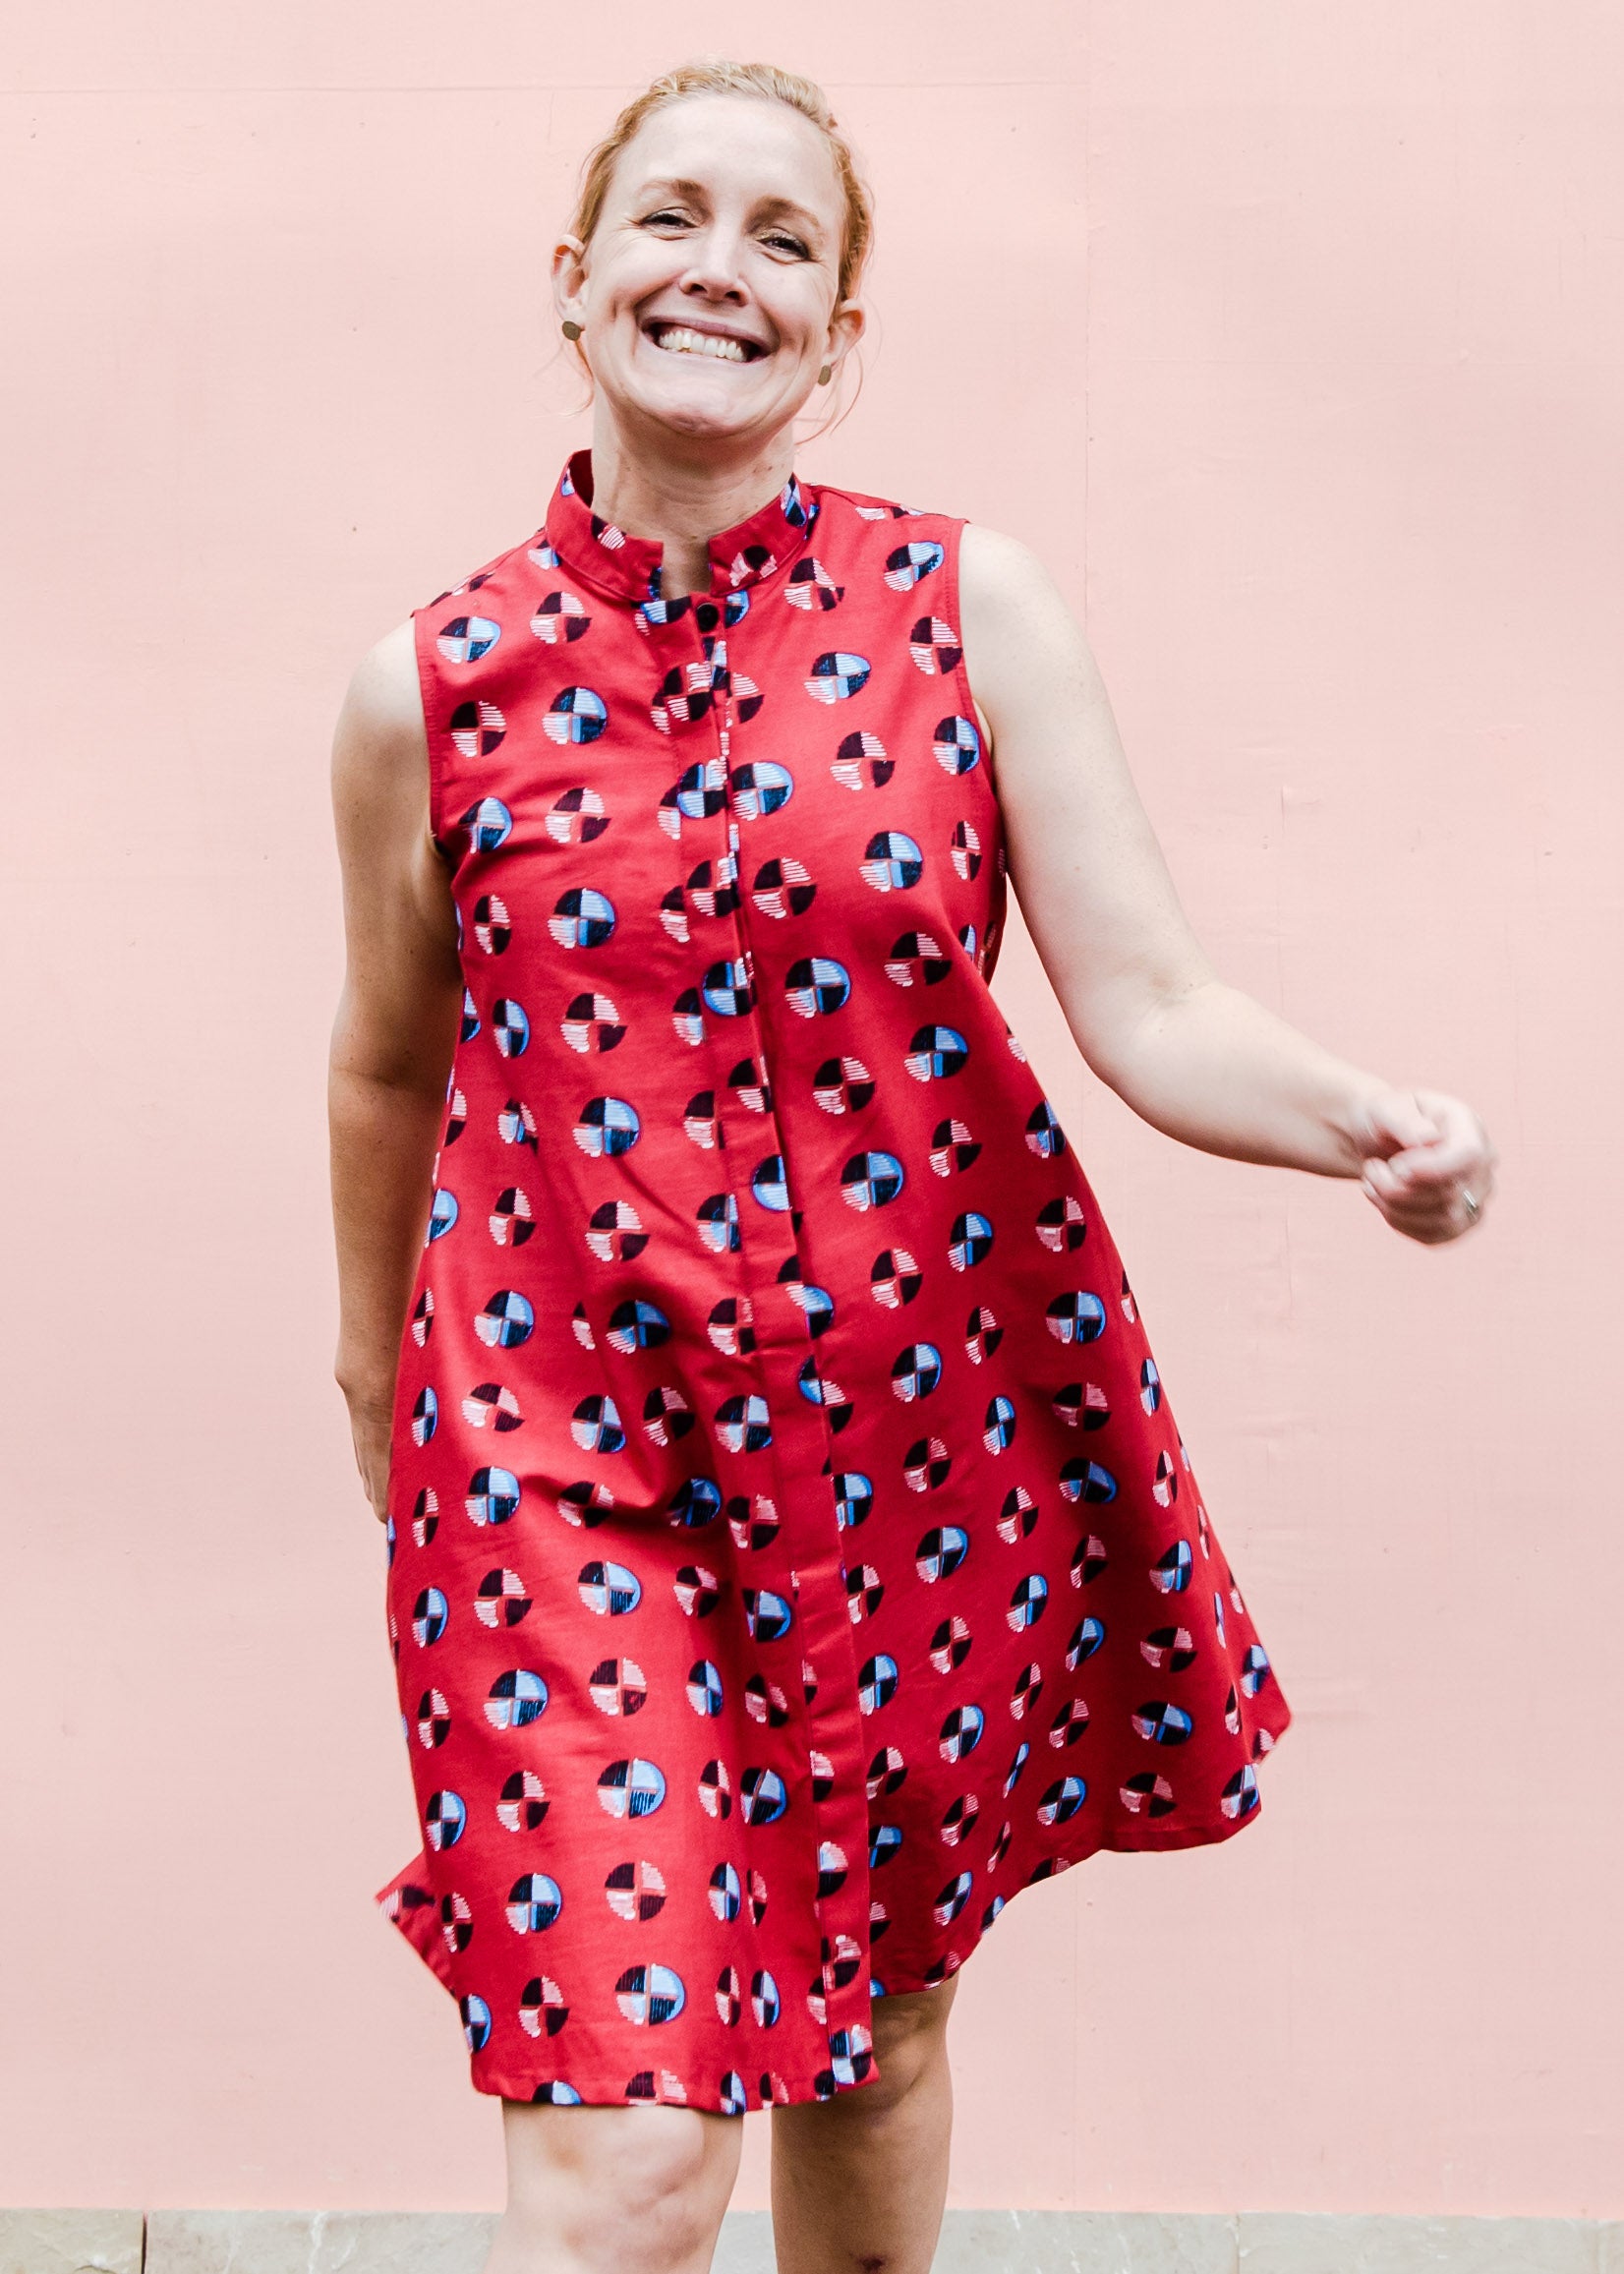 model wearing a sleeveless dress with a red, blue, white and black design